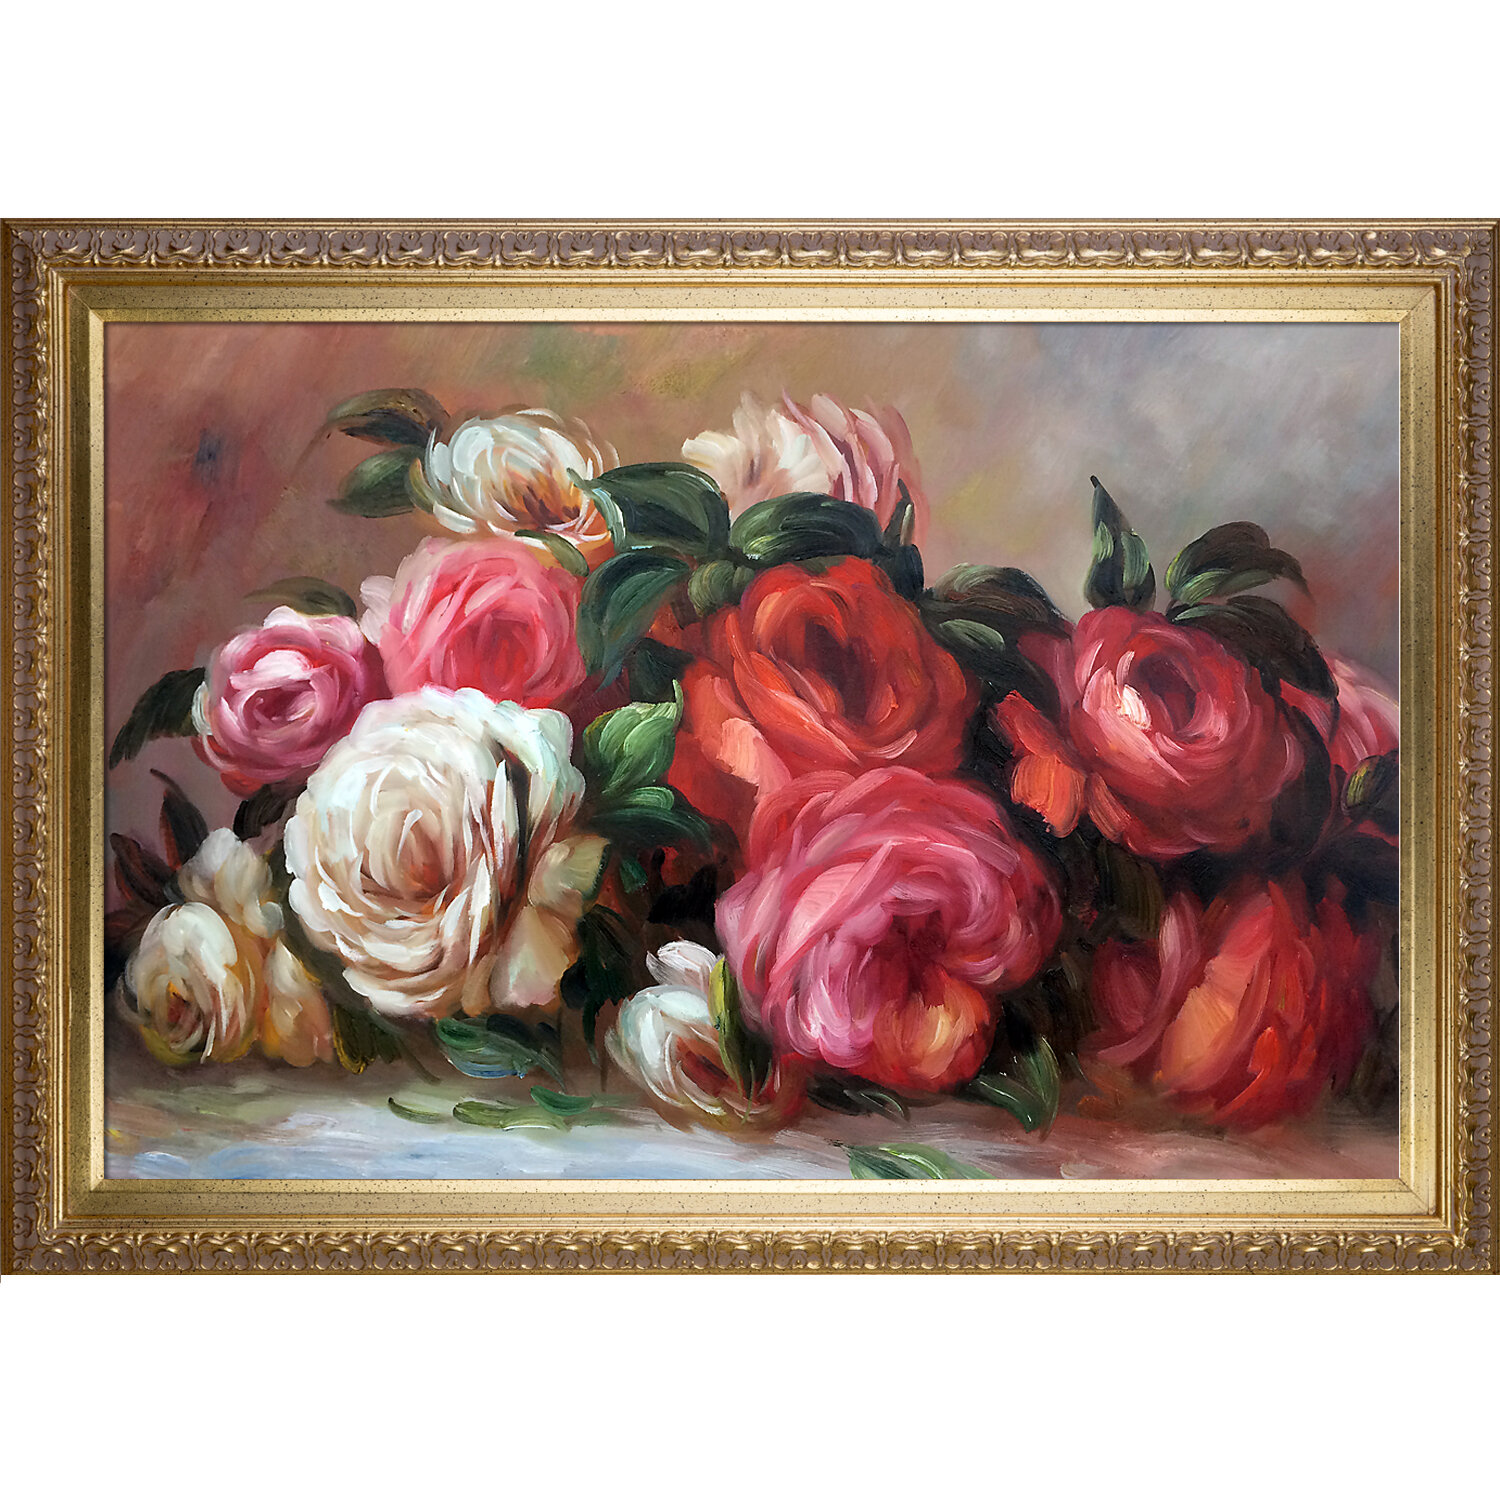 LARGE BOX FRAMED CANVAS WALL ART RED ROSE PICTURE STUNNING PRINT FLOWER  A0 A1